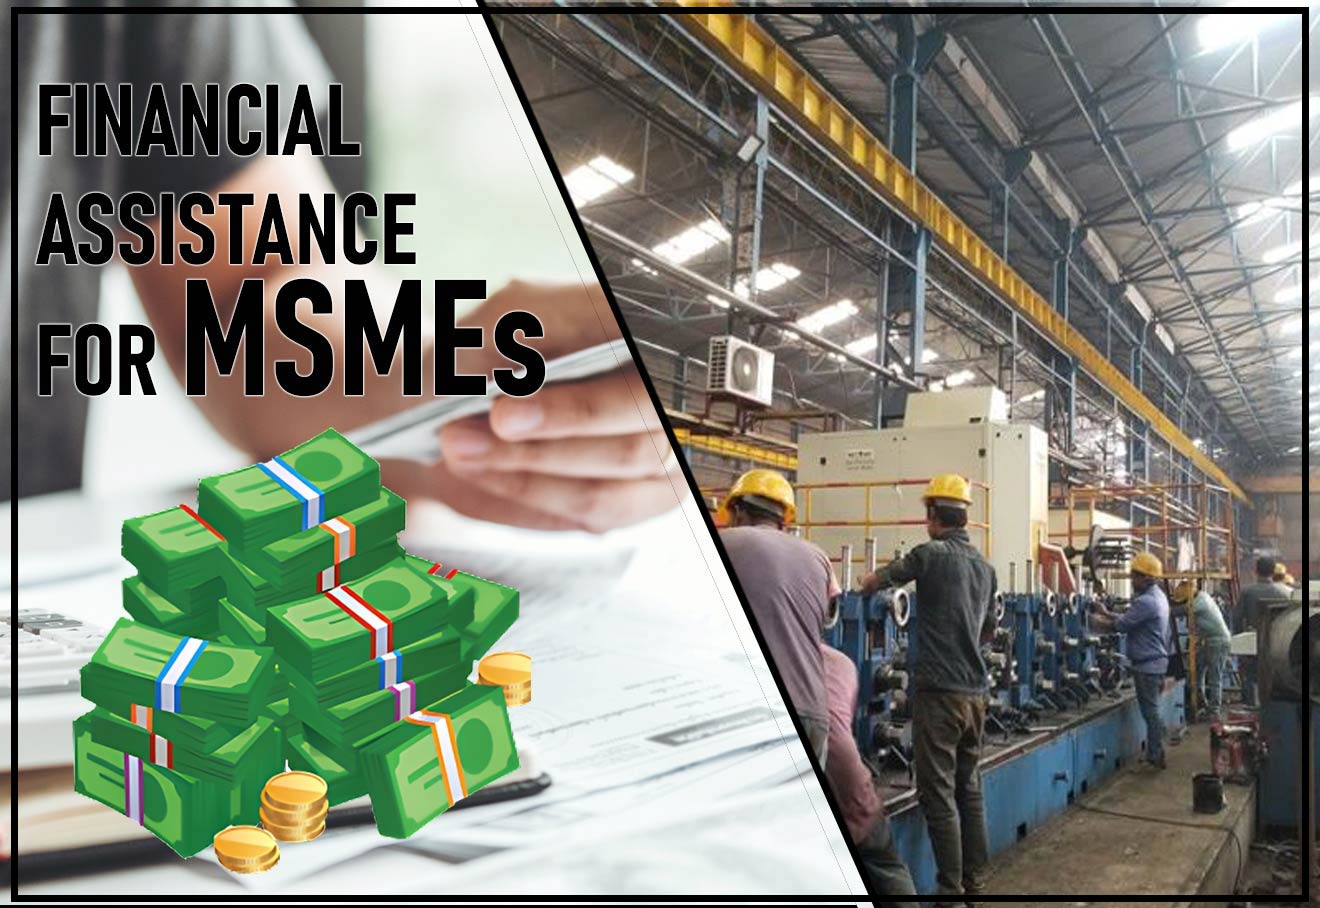 Odisha Govt Provides Financial Assistance To MSMEs For Listing On Stock Exchanges